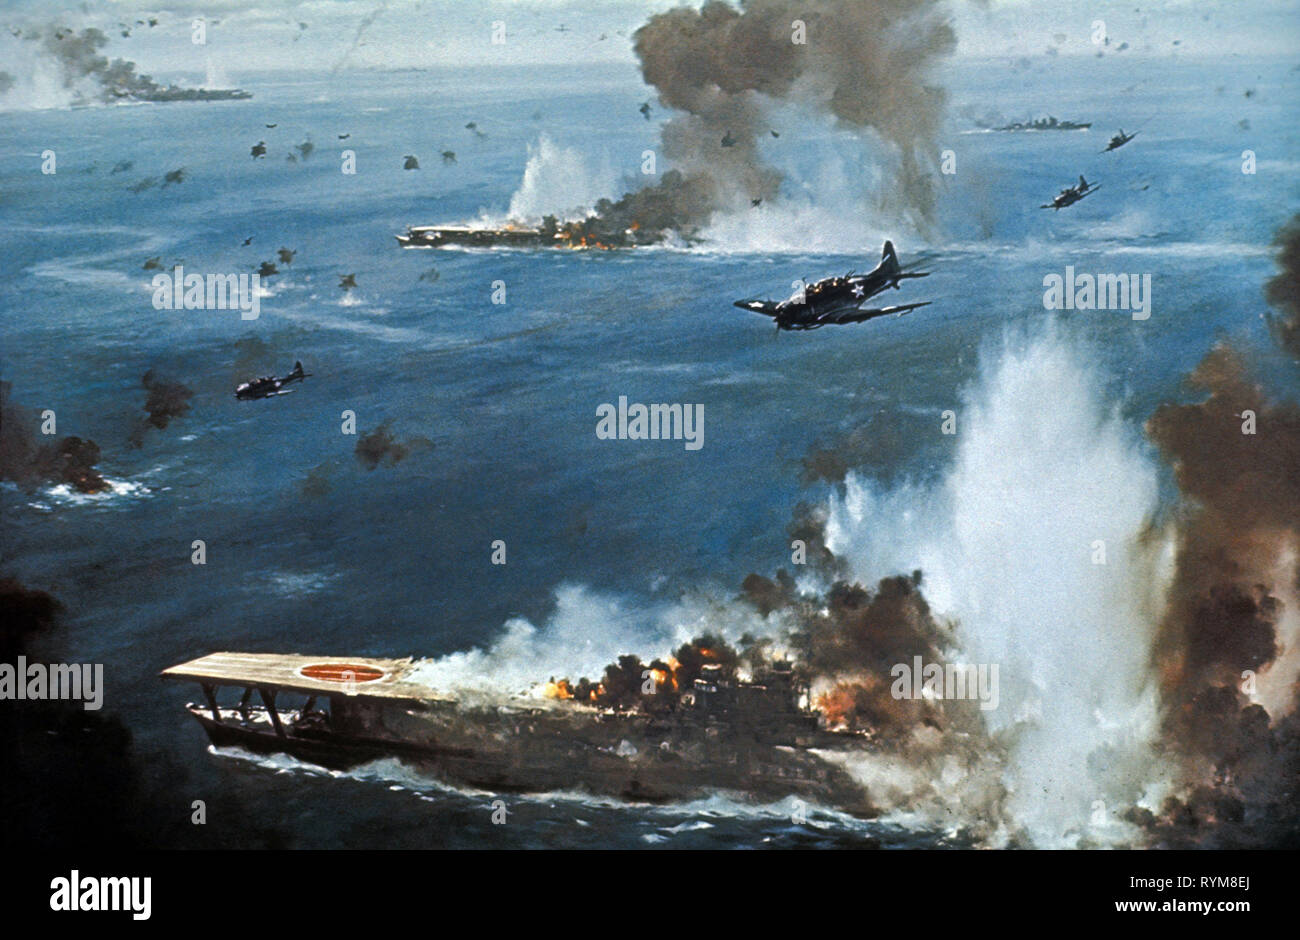 JAPANESE AIRCRAFT ATTACK SHIPS, THE BATTLE OF MIDWAY, 1976 Stock Photo